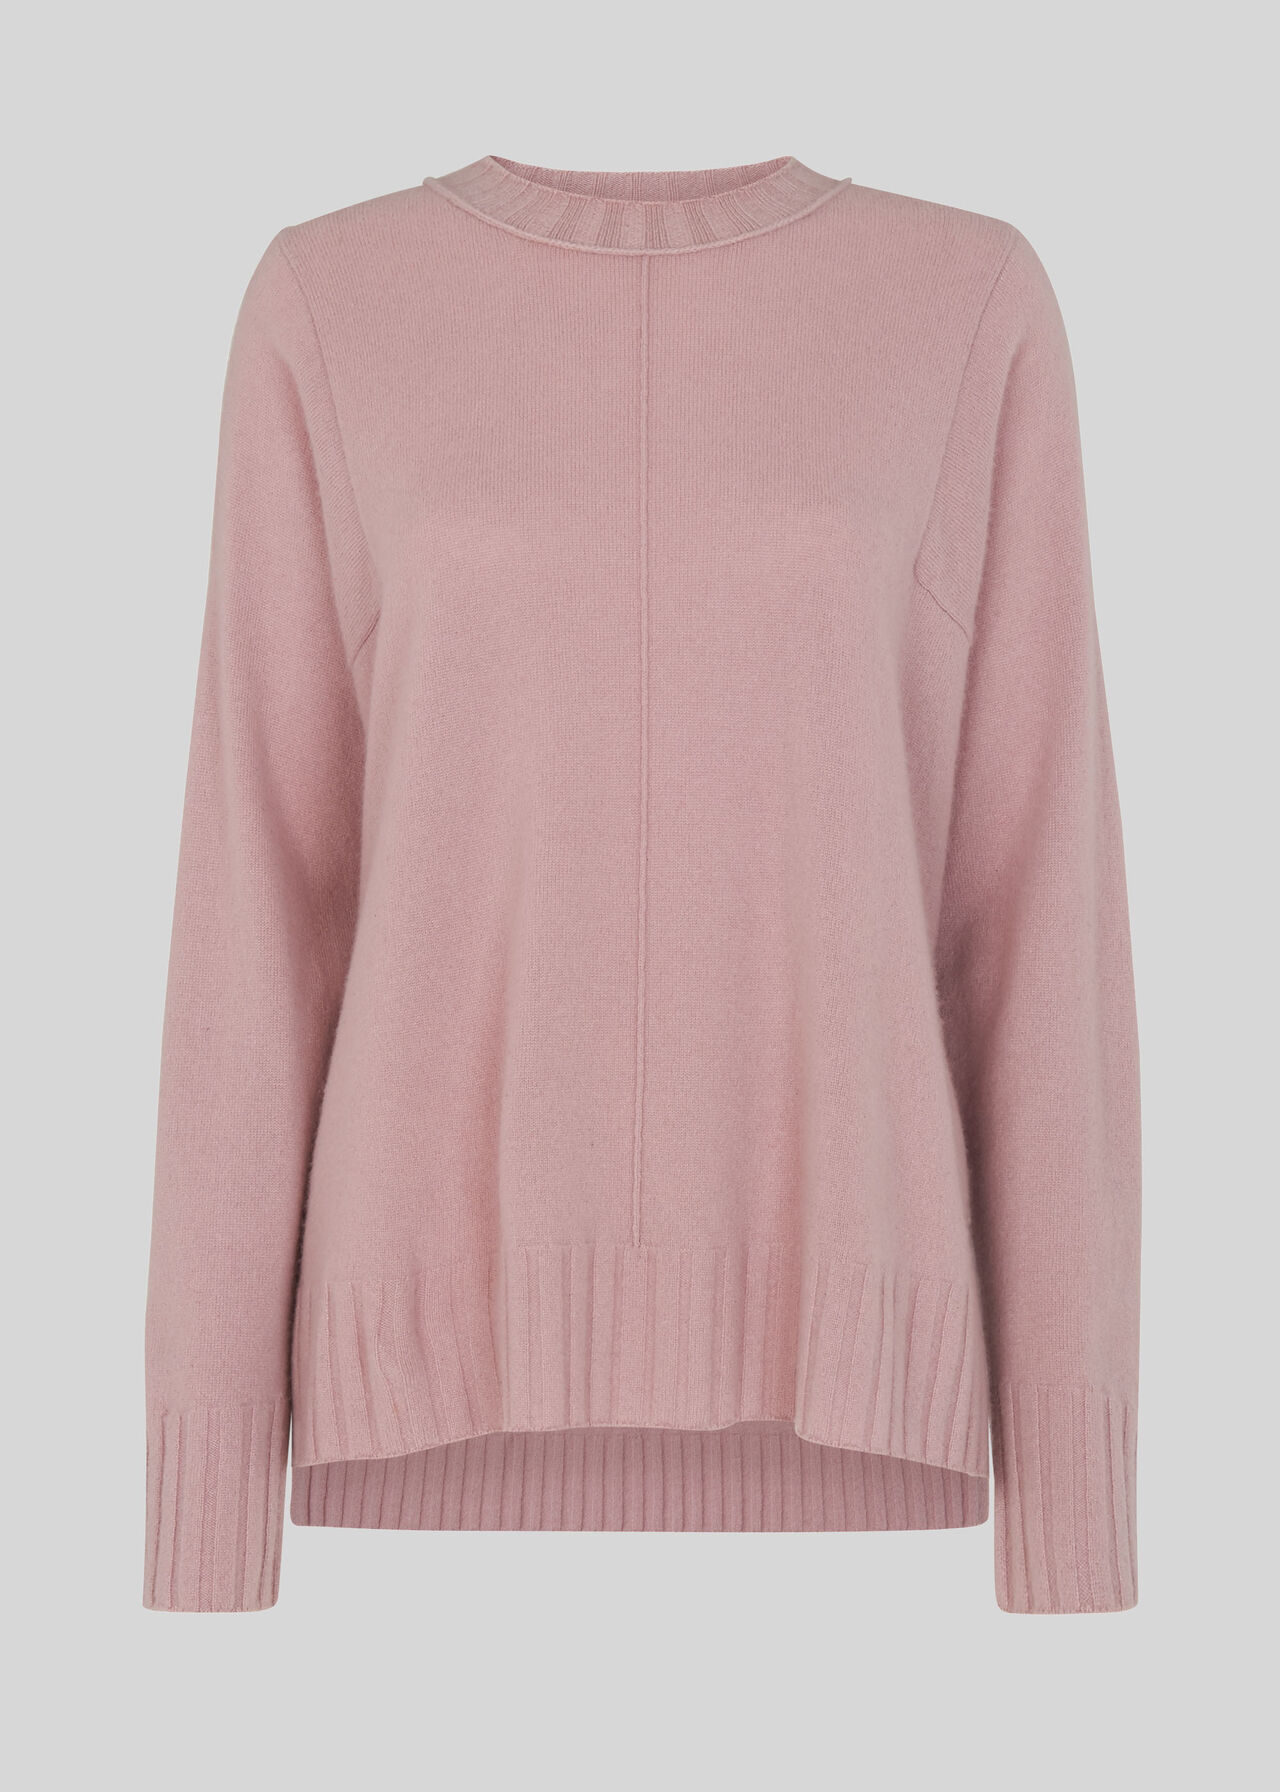 Pink Cashmere Crew Neck Sweater | WHISTLES | Whistles UK